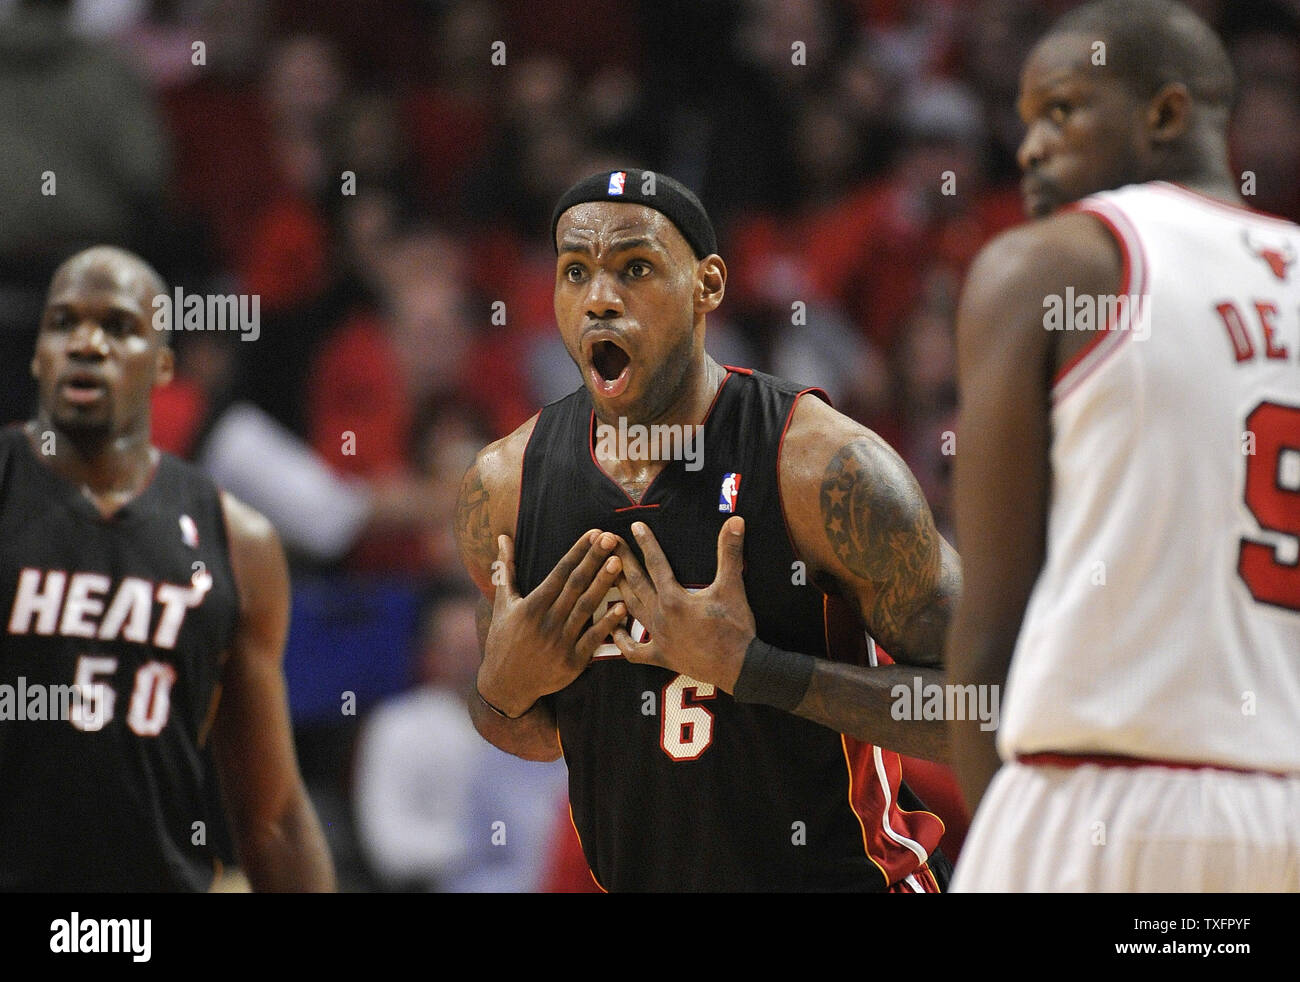 Miami Heat forward LeBron James reacts after being called for a foul during the first quarter of game 1 of the Eastern Conference Finals against the Chicago Bulls at the United Center in Chicago on May 15, 2011.     UPI/Brian Kersey Stock Photo